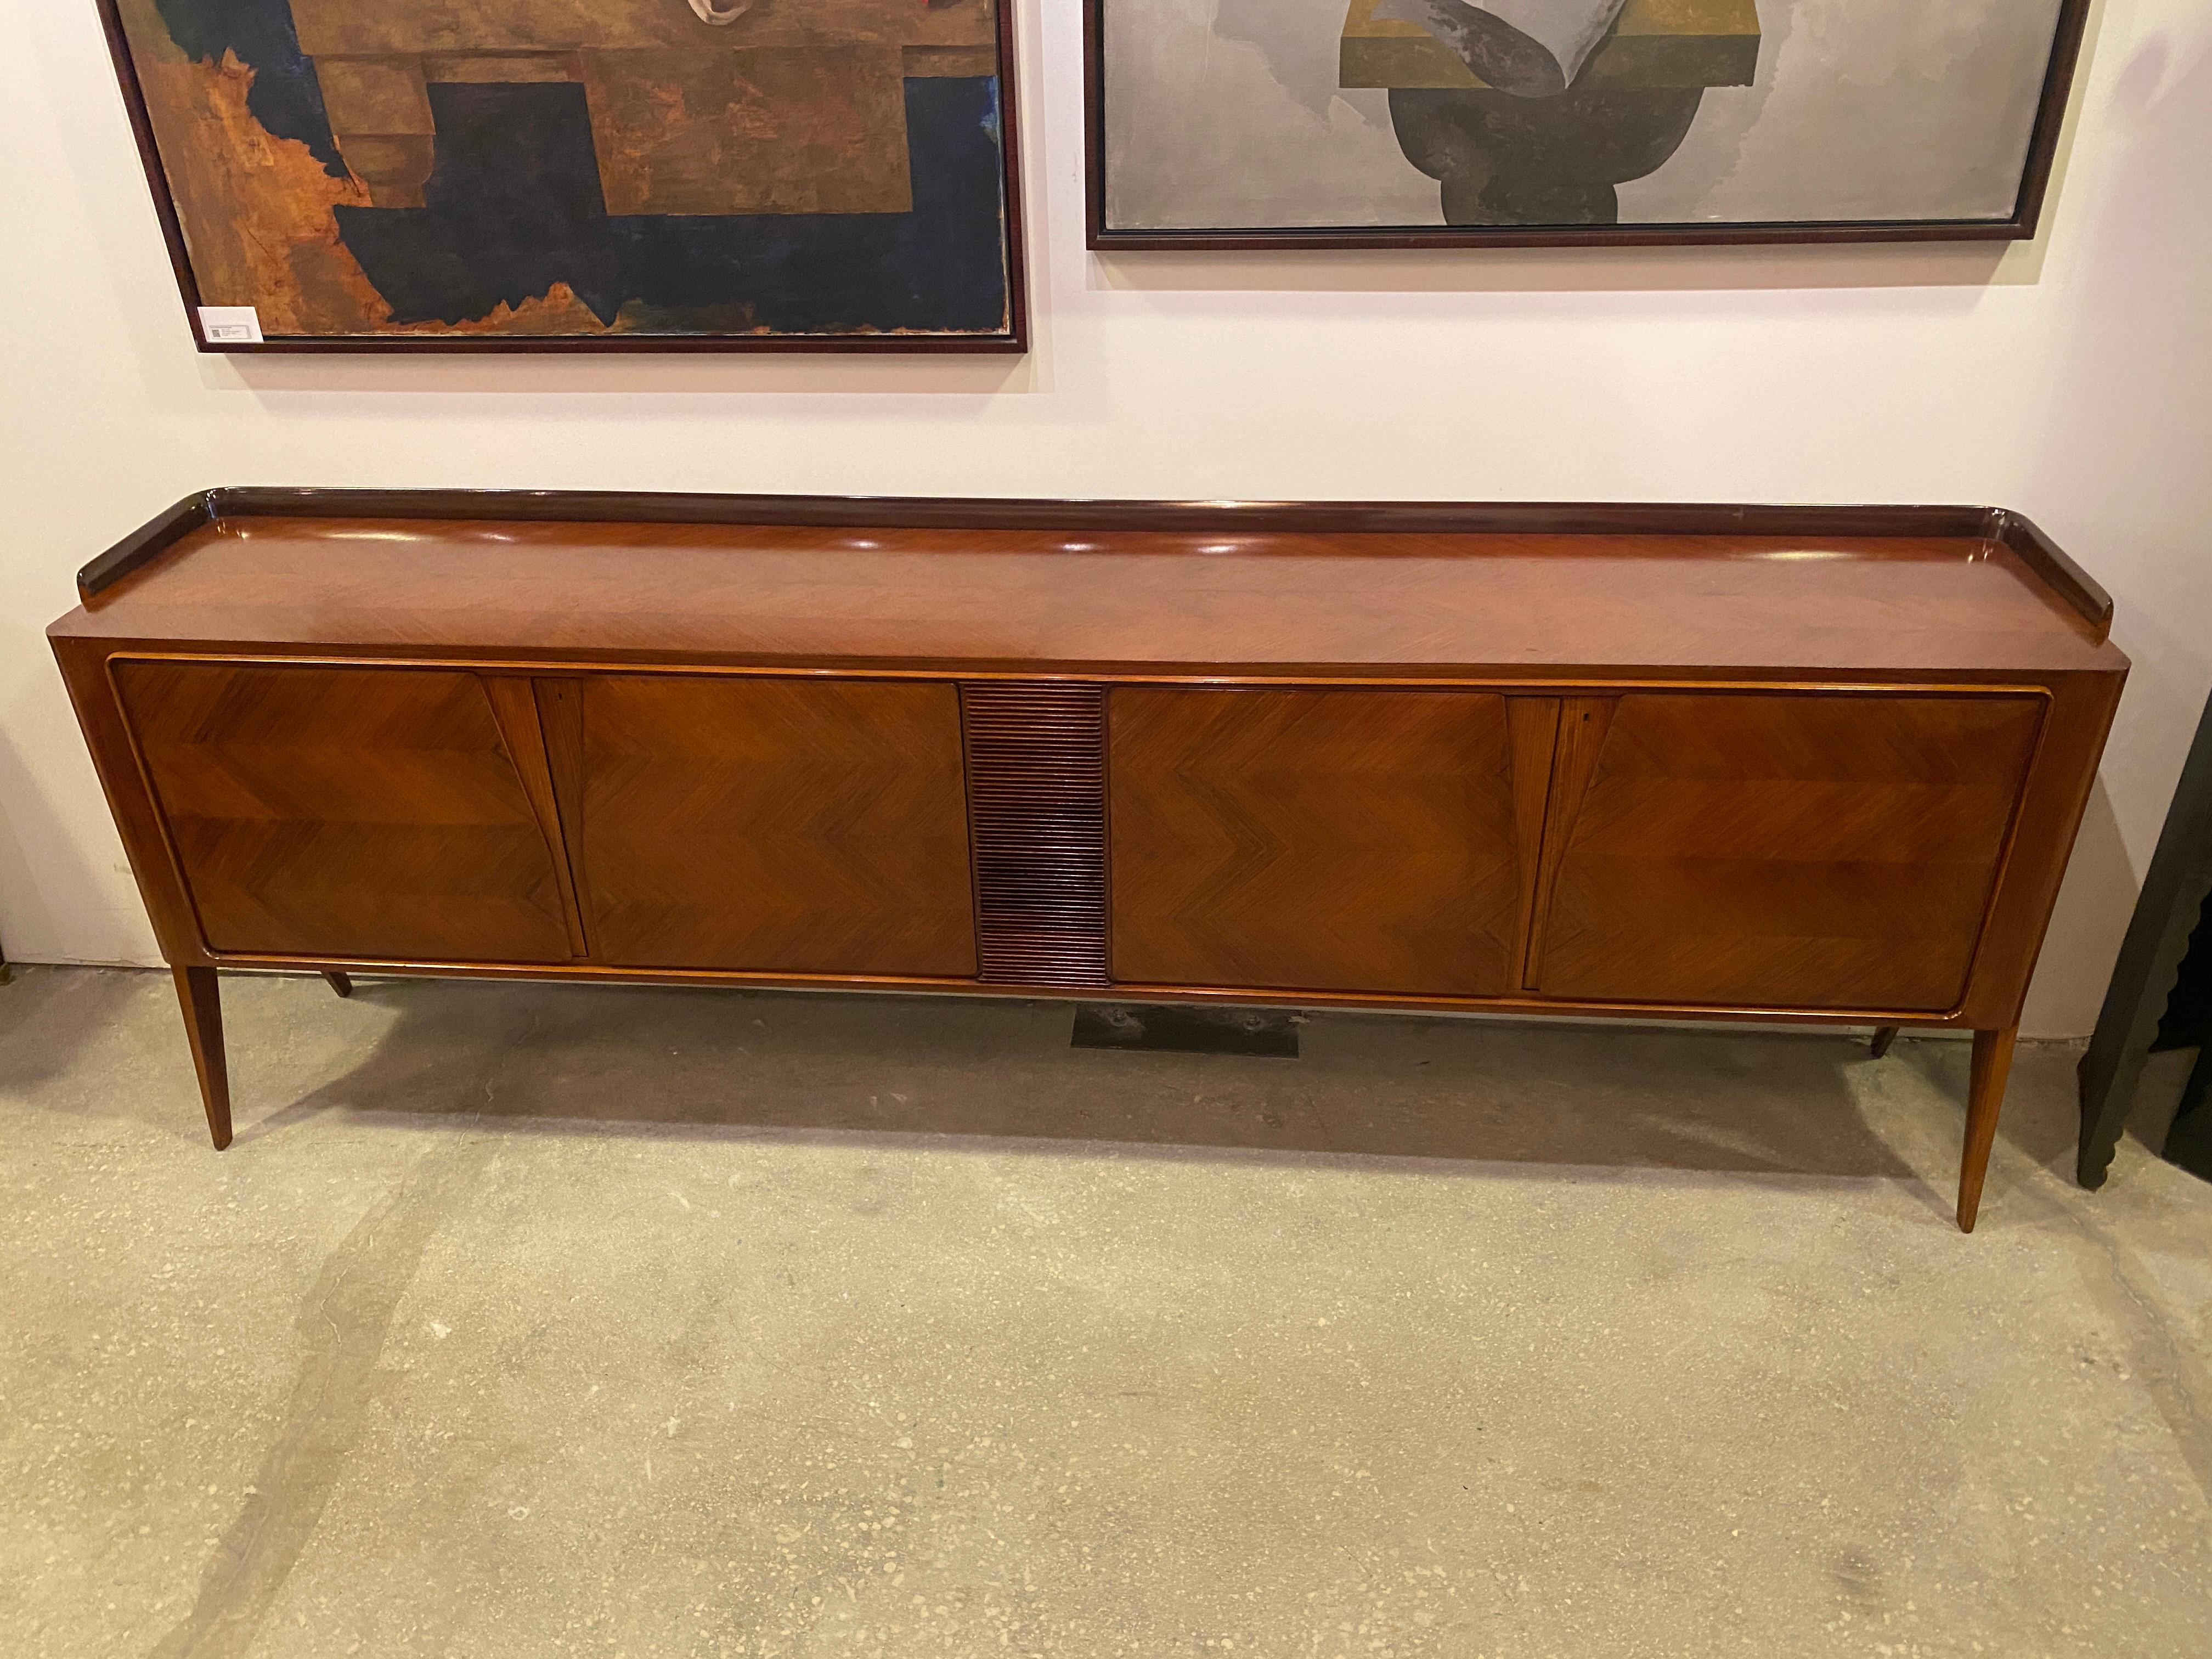 This four door credenza has fine herringbone parquetry displayed on both sets of doors, separated by a faux louvered partitian. The four doors open to ample cabinet space on both sides with a set of shelves included. The top has a raised gallery on